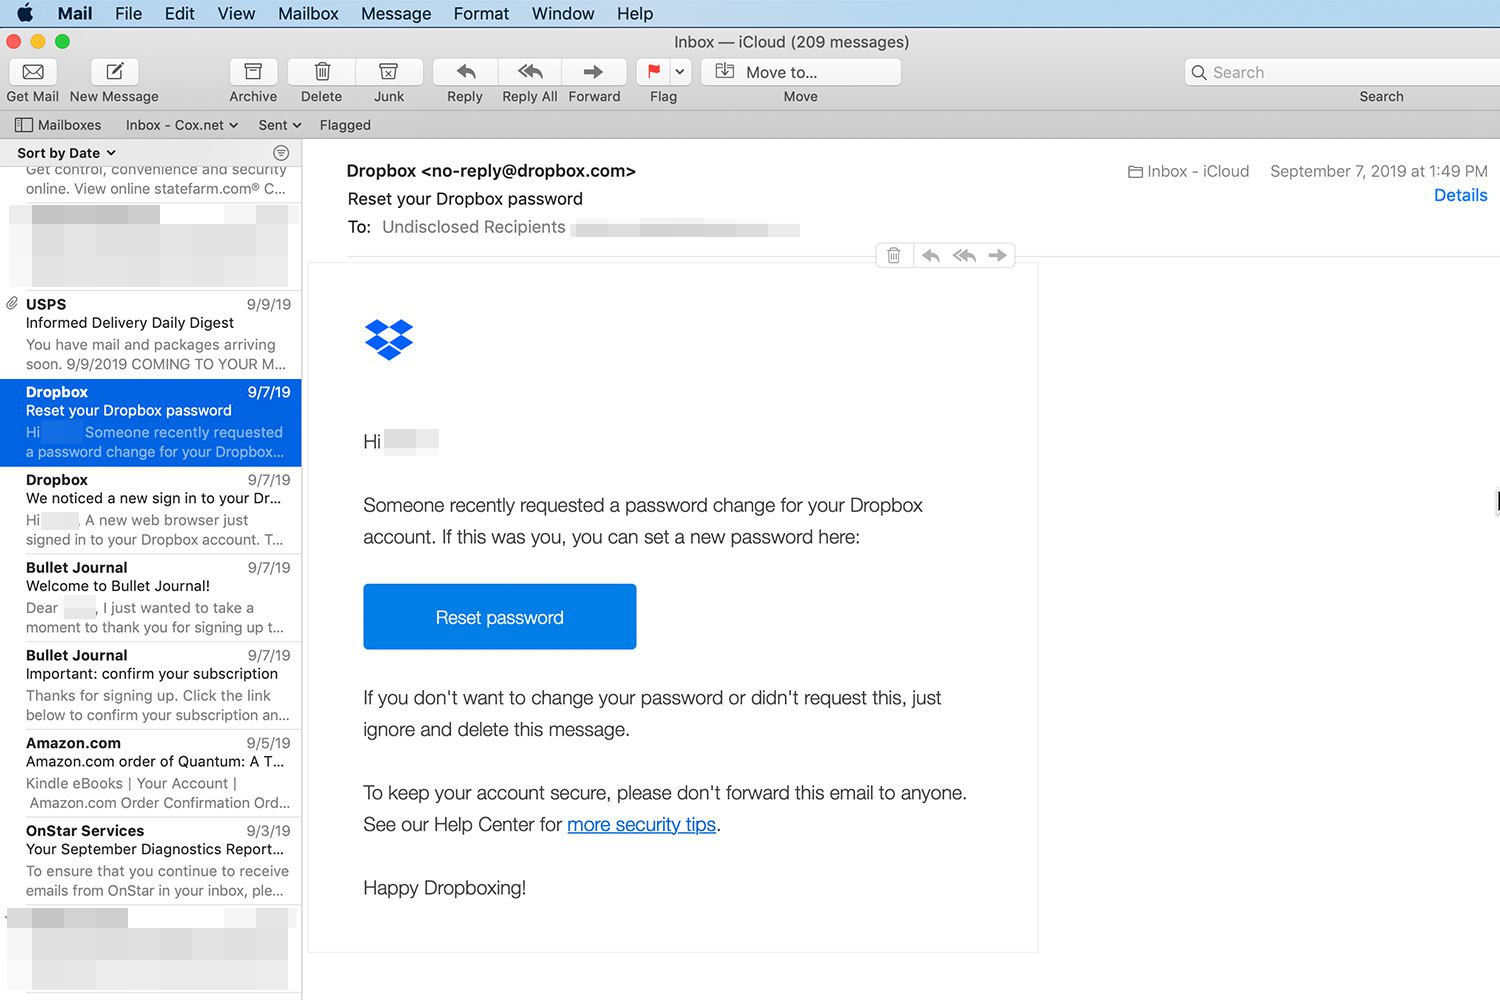 mac photos make picture smaller for email